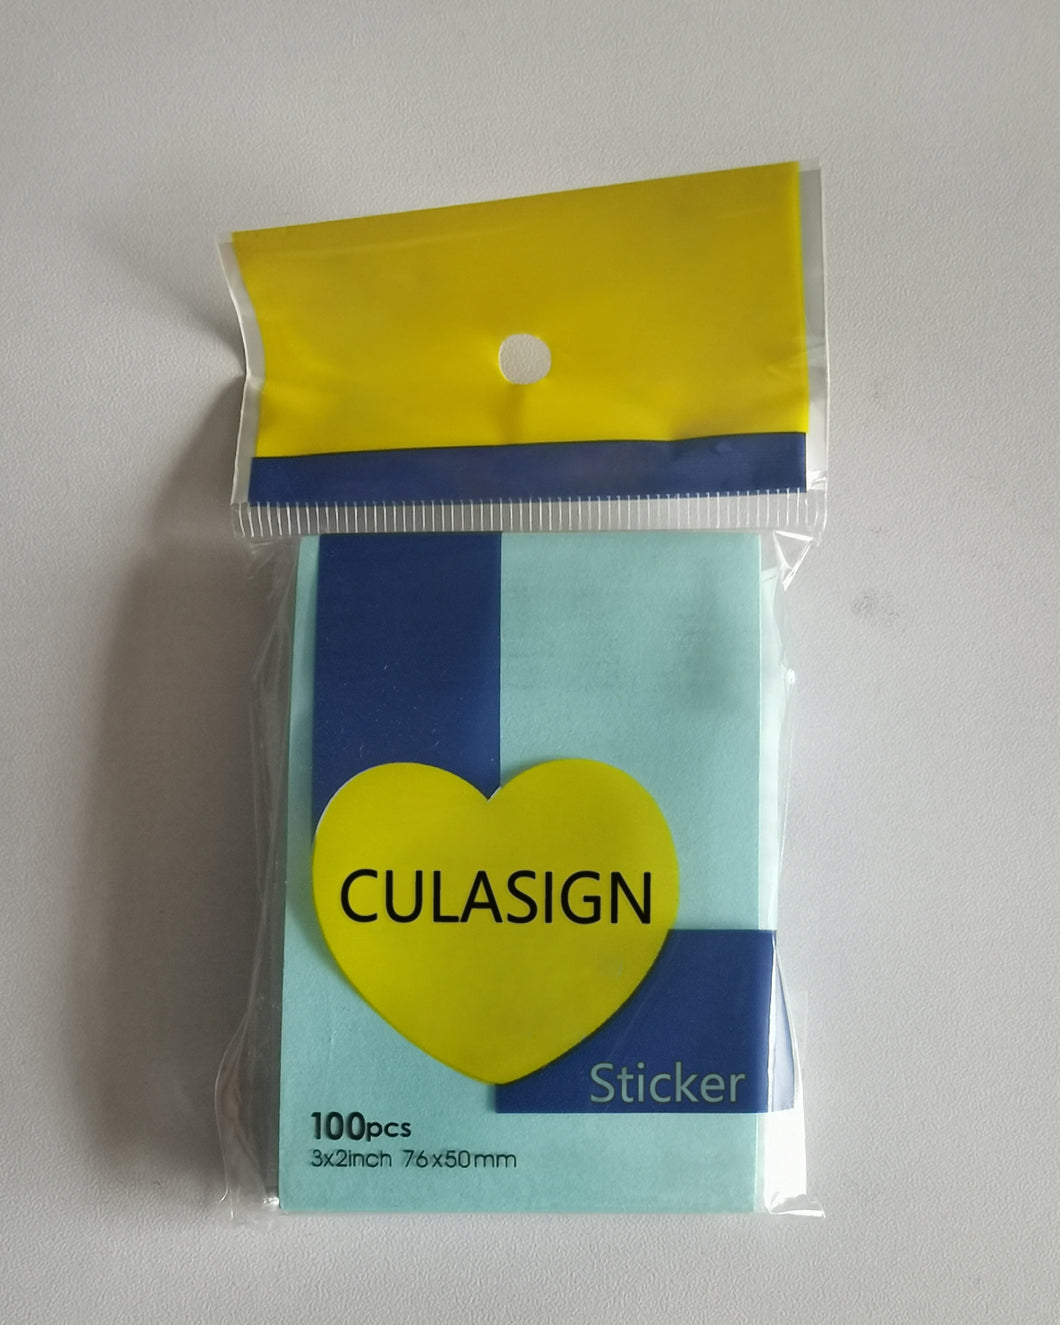 CULASIGN sticker stationery,Sticky Notes 3x3, Sticker Notes, Stickies Notes, Self-Stick Note Pads, Note Stickers, Small Notes